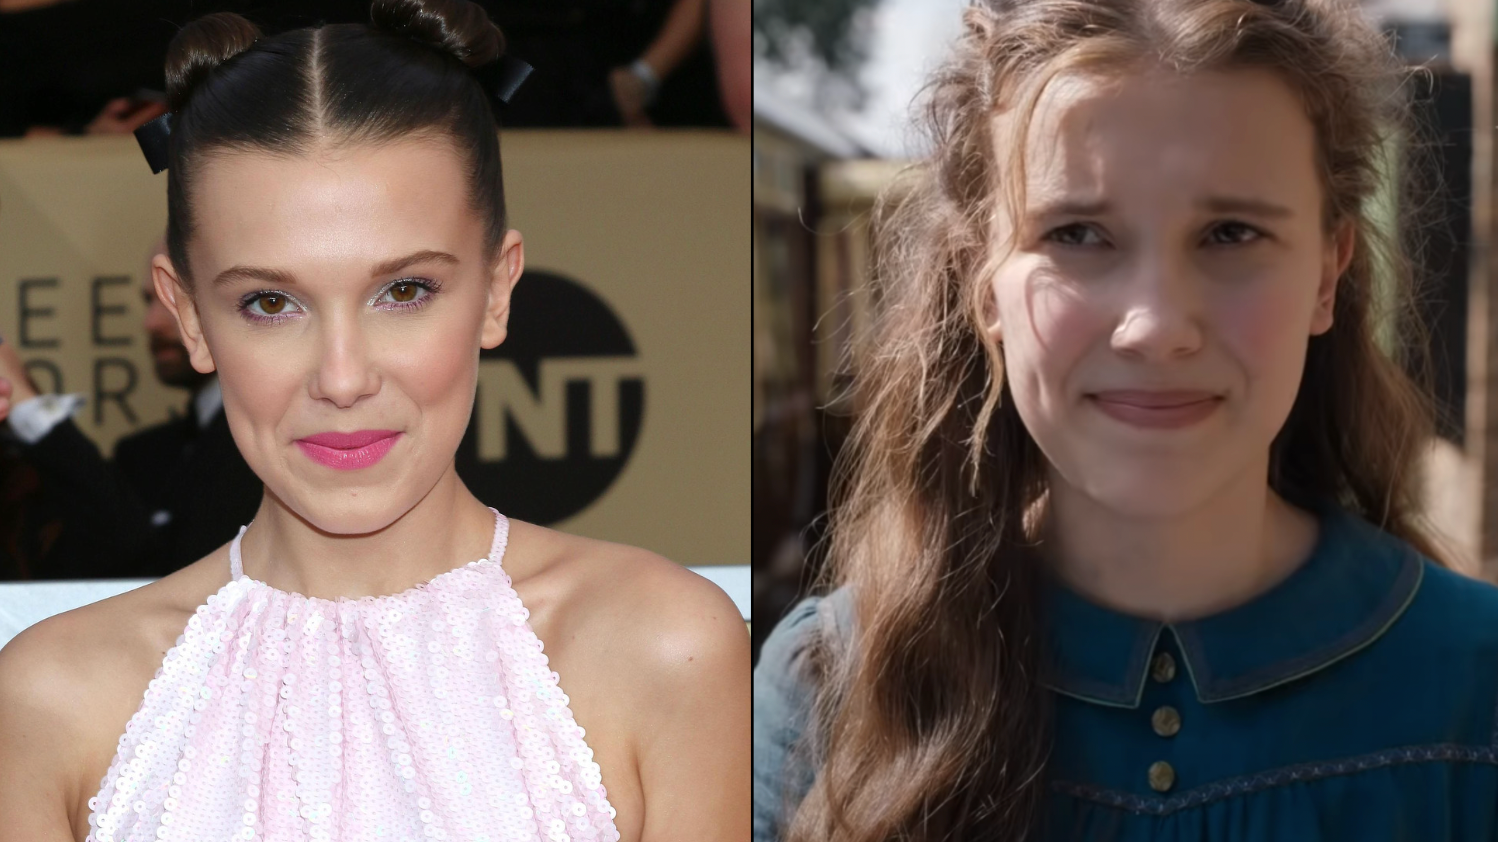 Millie Bobby Brown's Net Worth in 2022